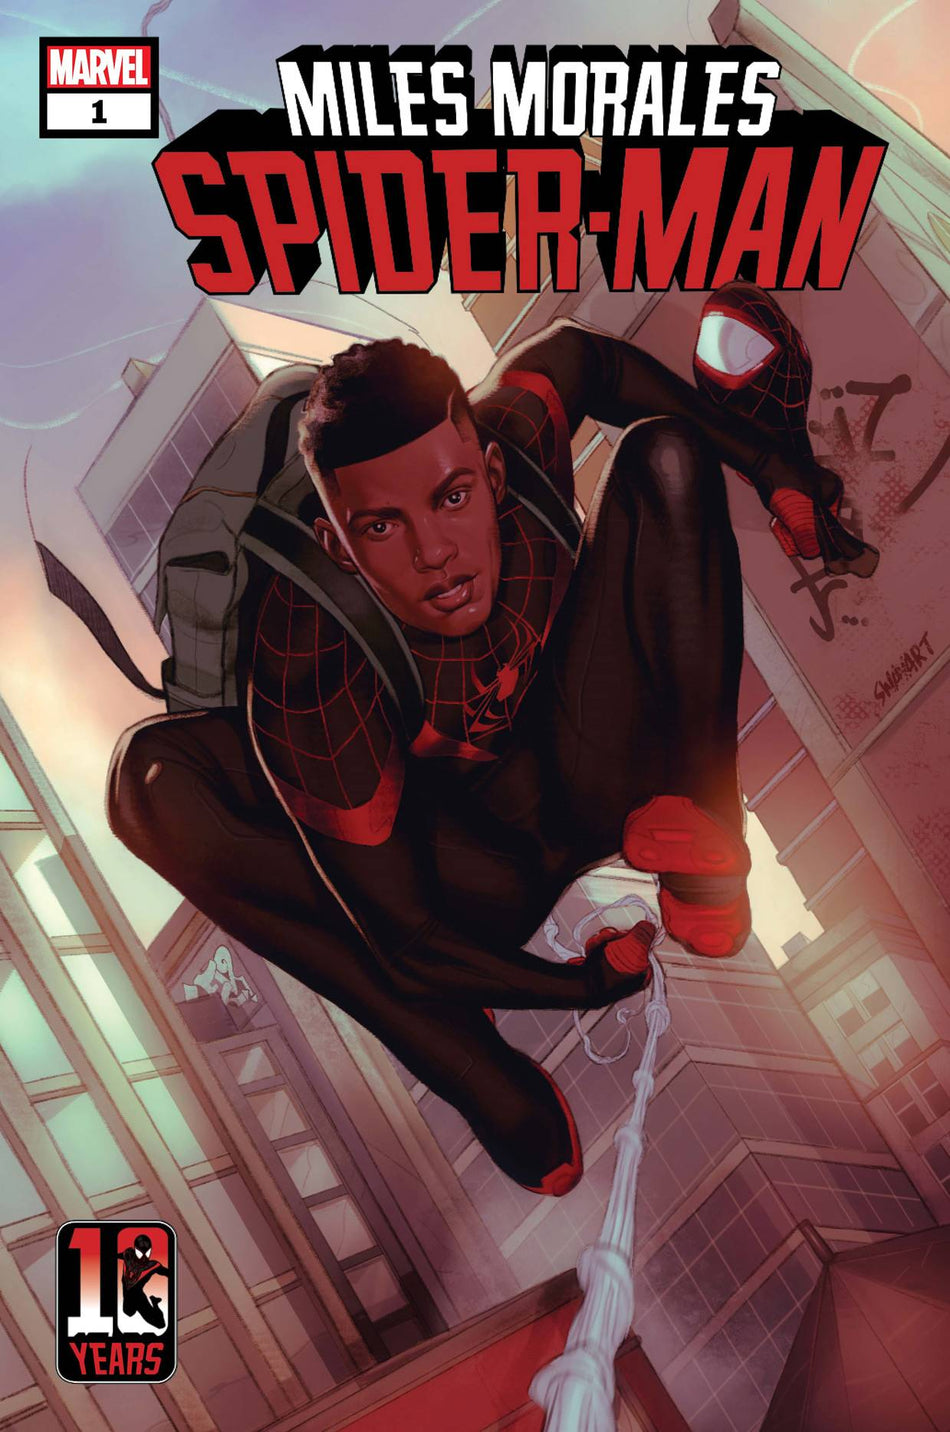 Photo of Miles Morales Marvel Tales Issue 1 comic sold by Stronghold Collectibles